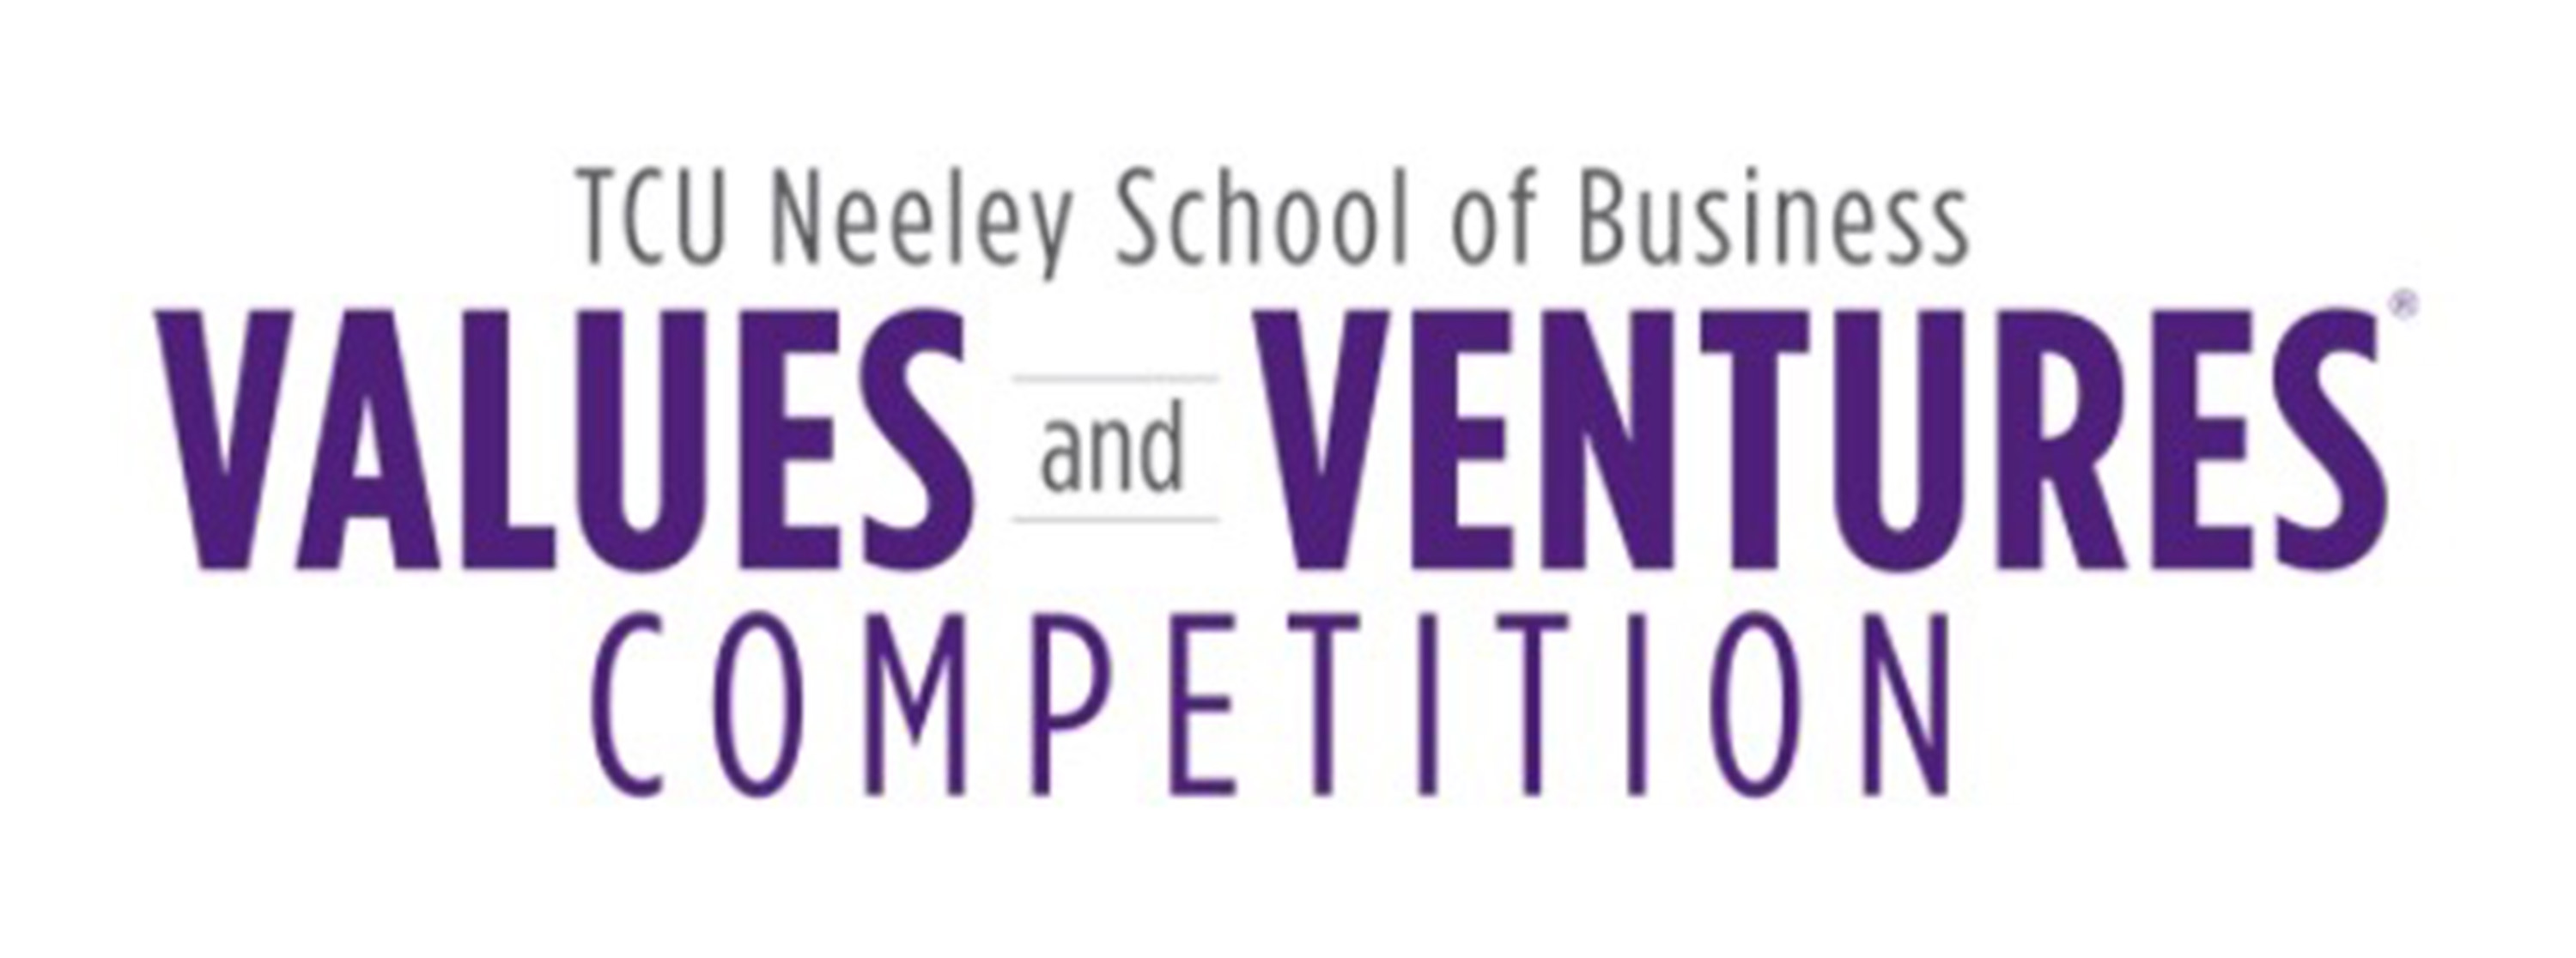 CREATE Competition - Neeley School of Business